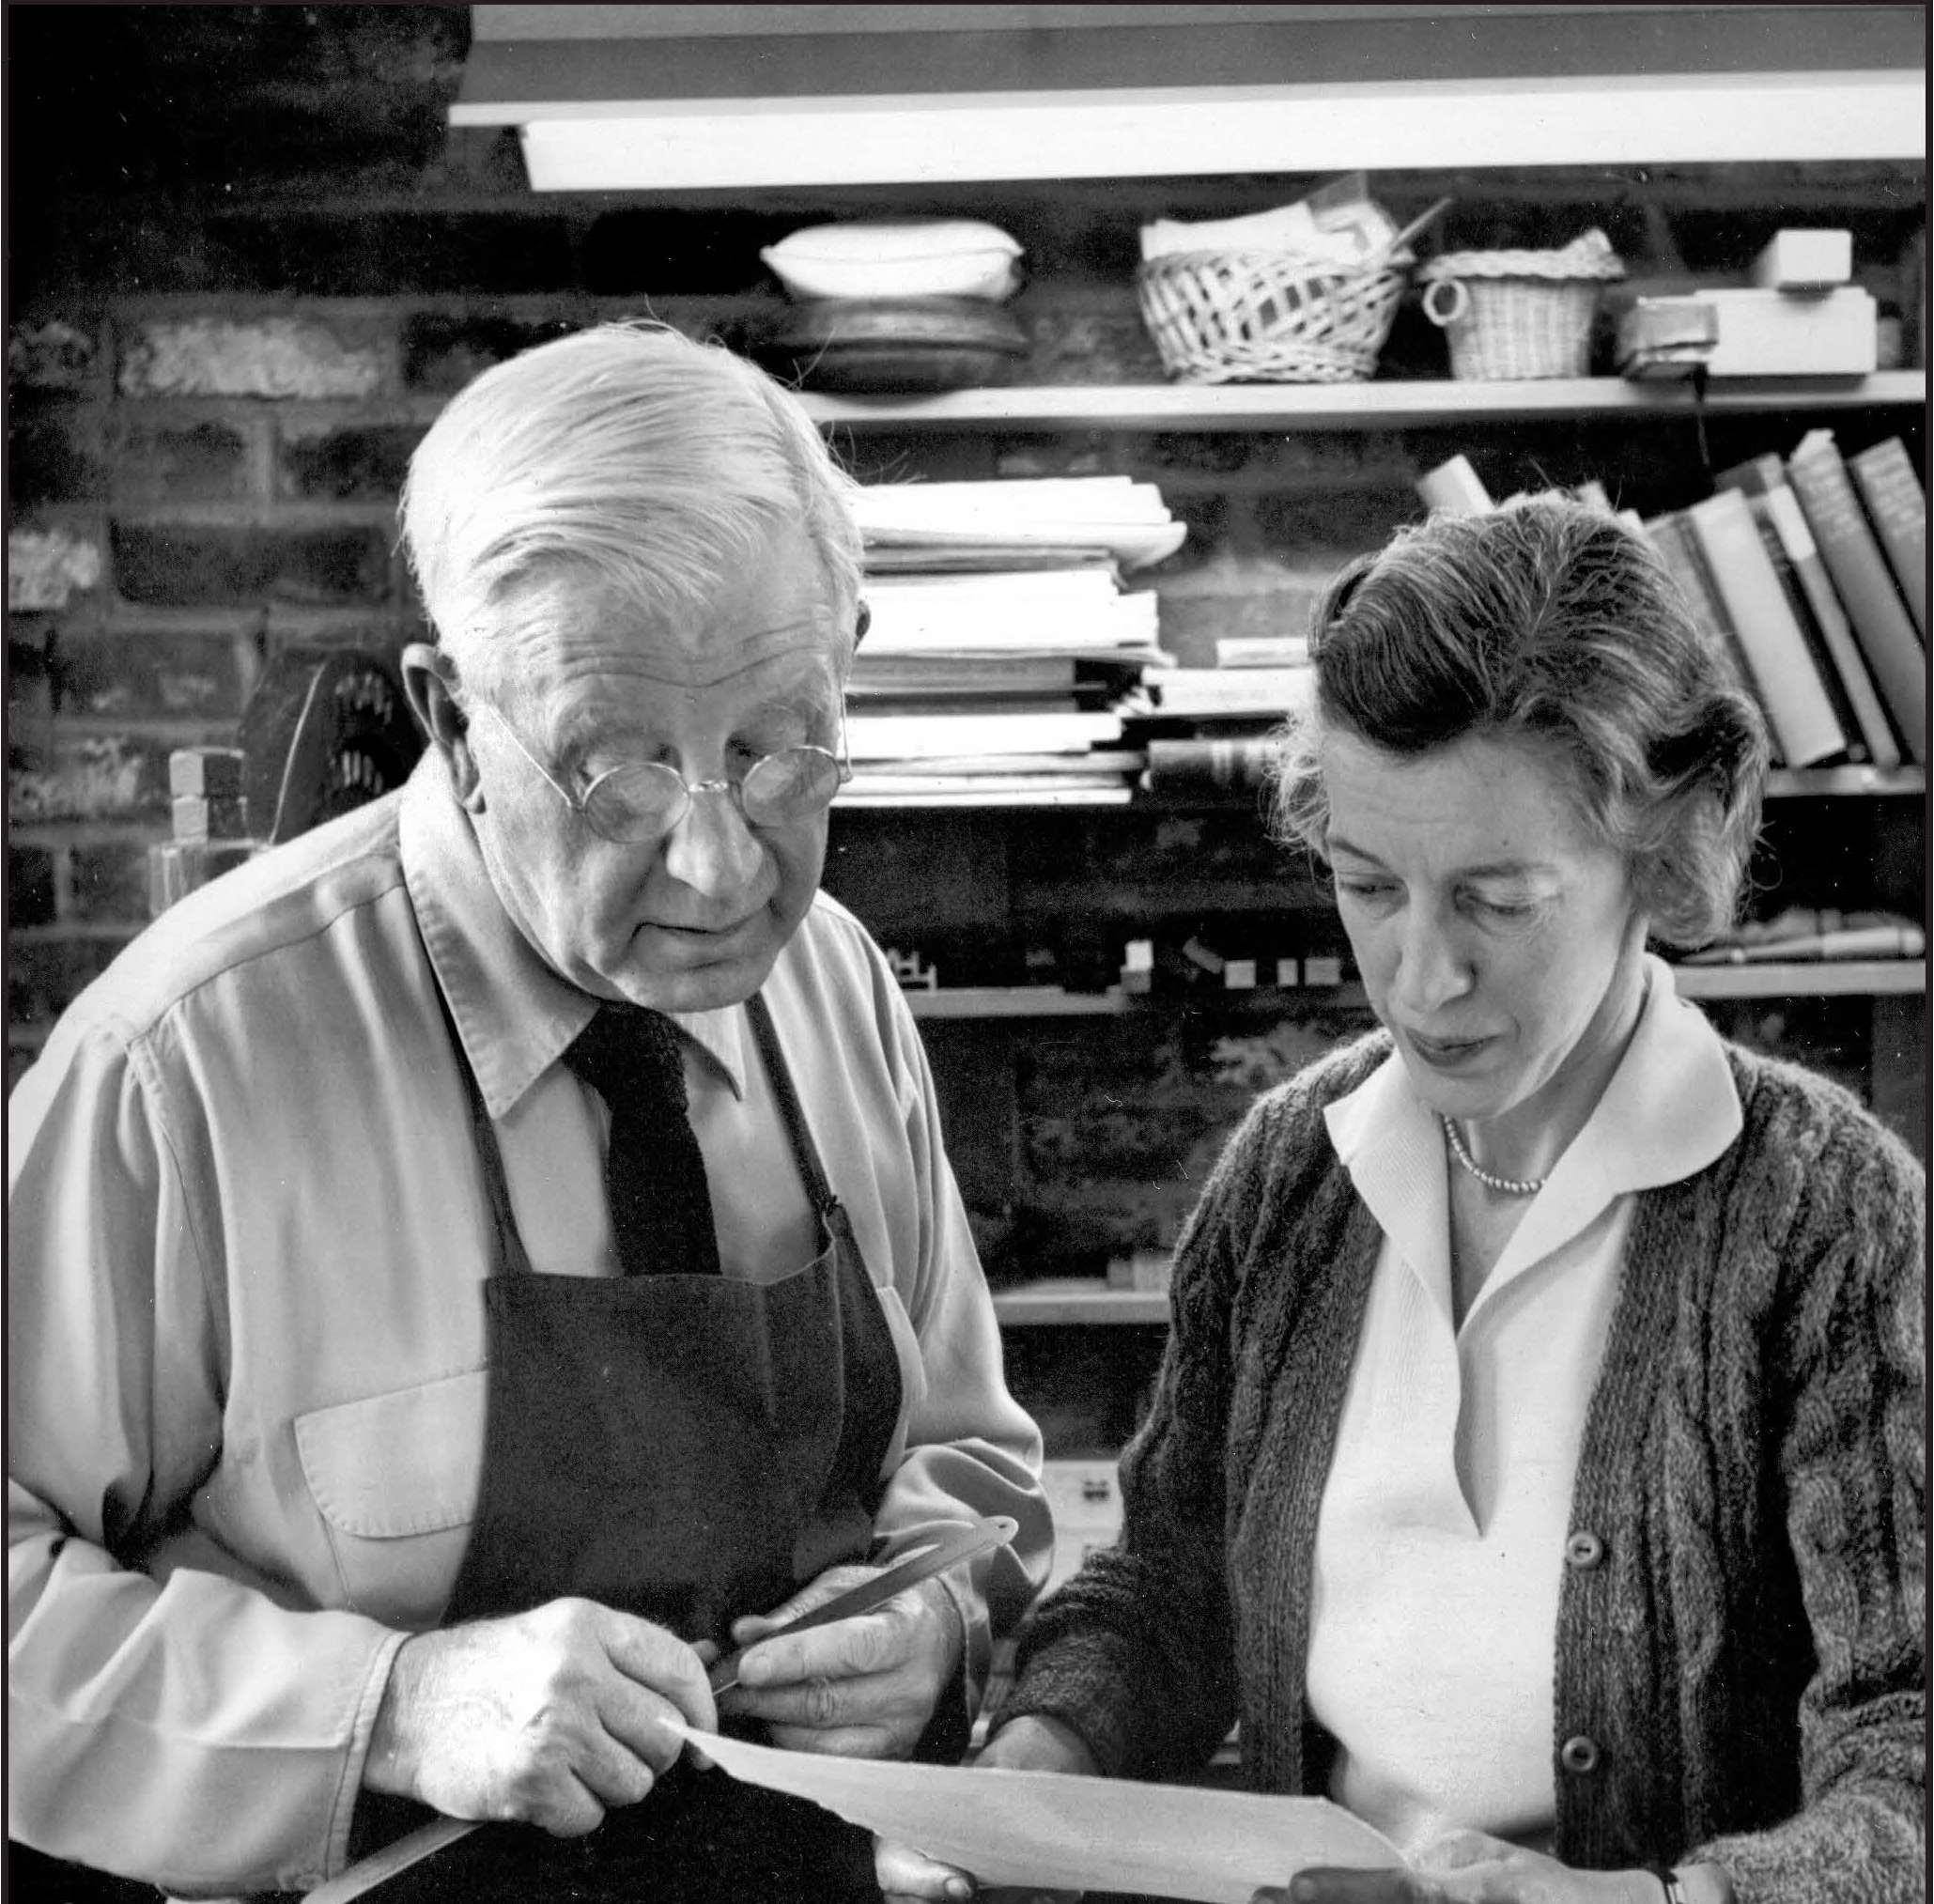 Here Victor and Carolyn Reading Hammer confer over a project.